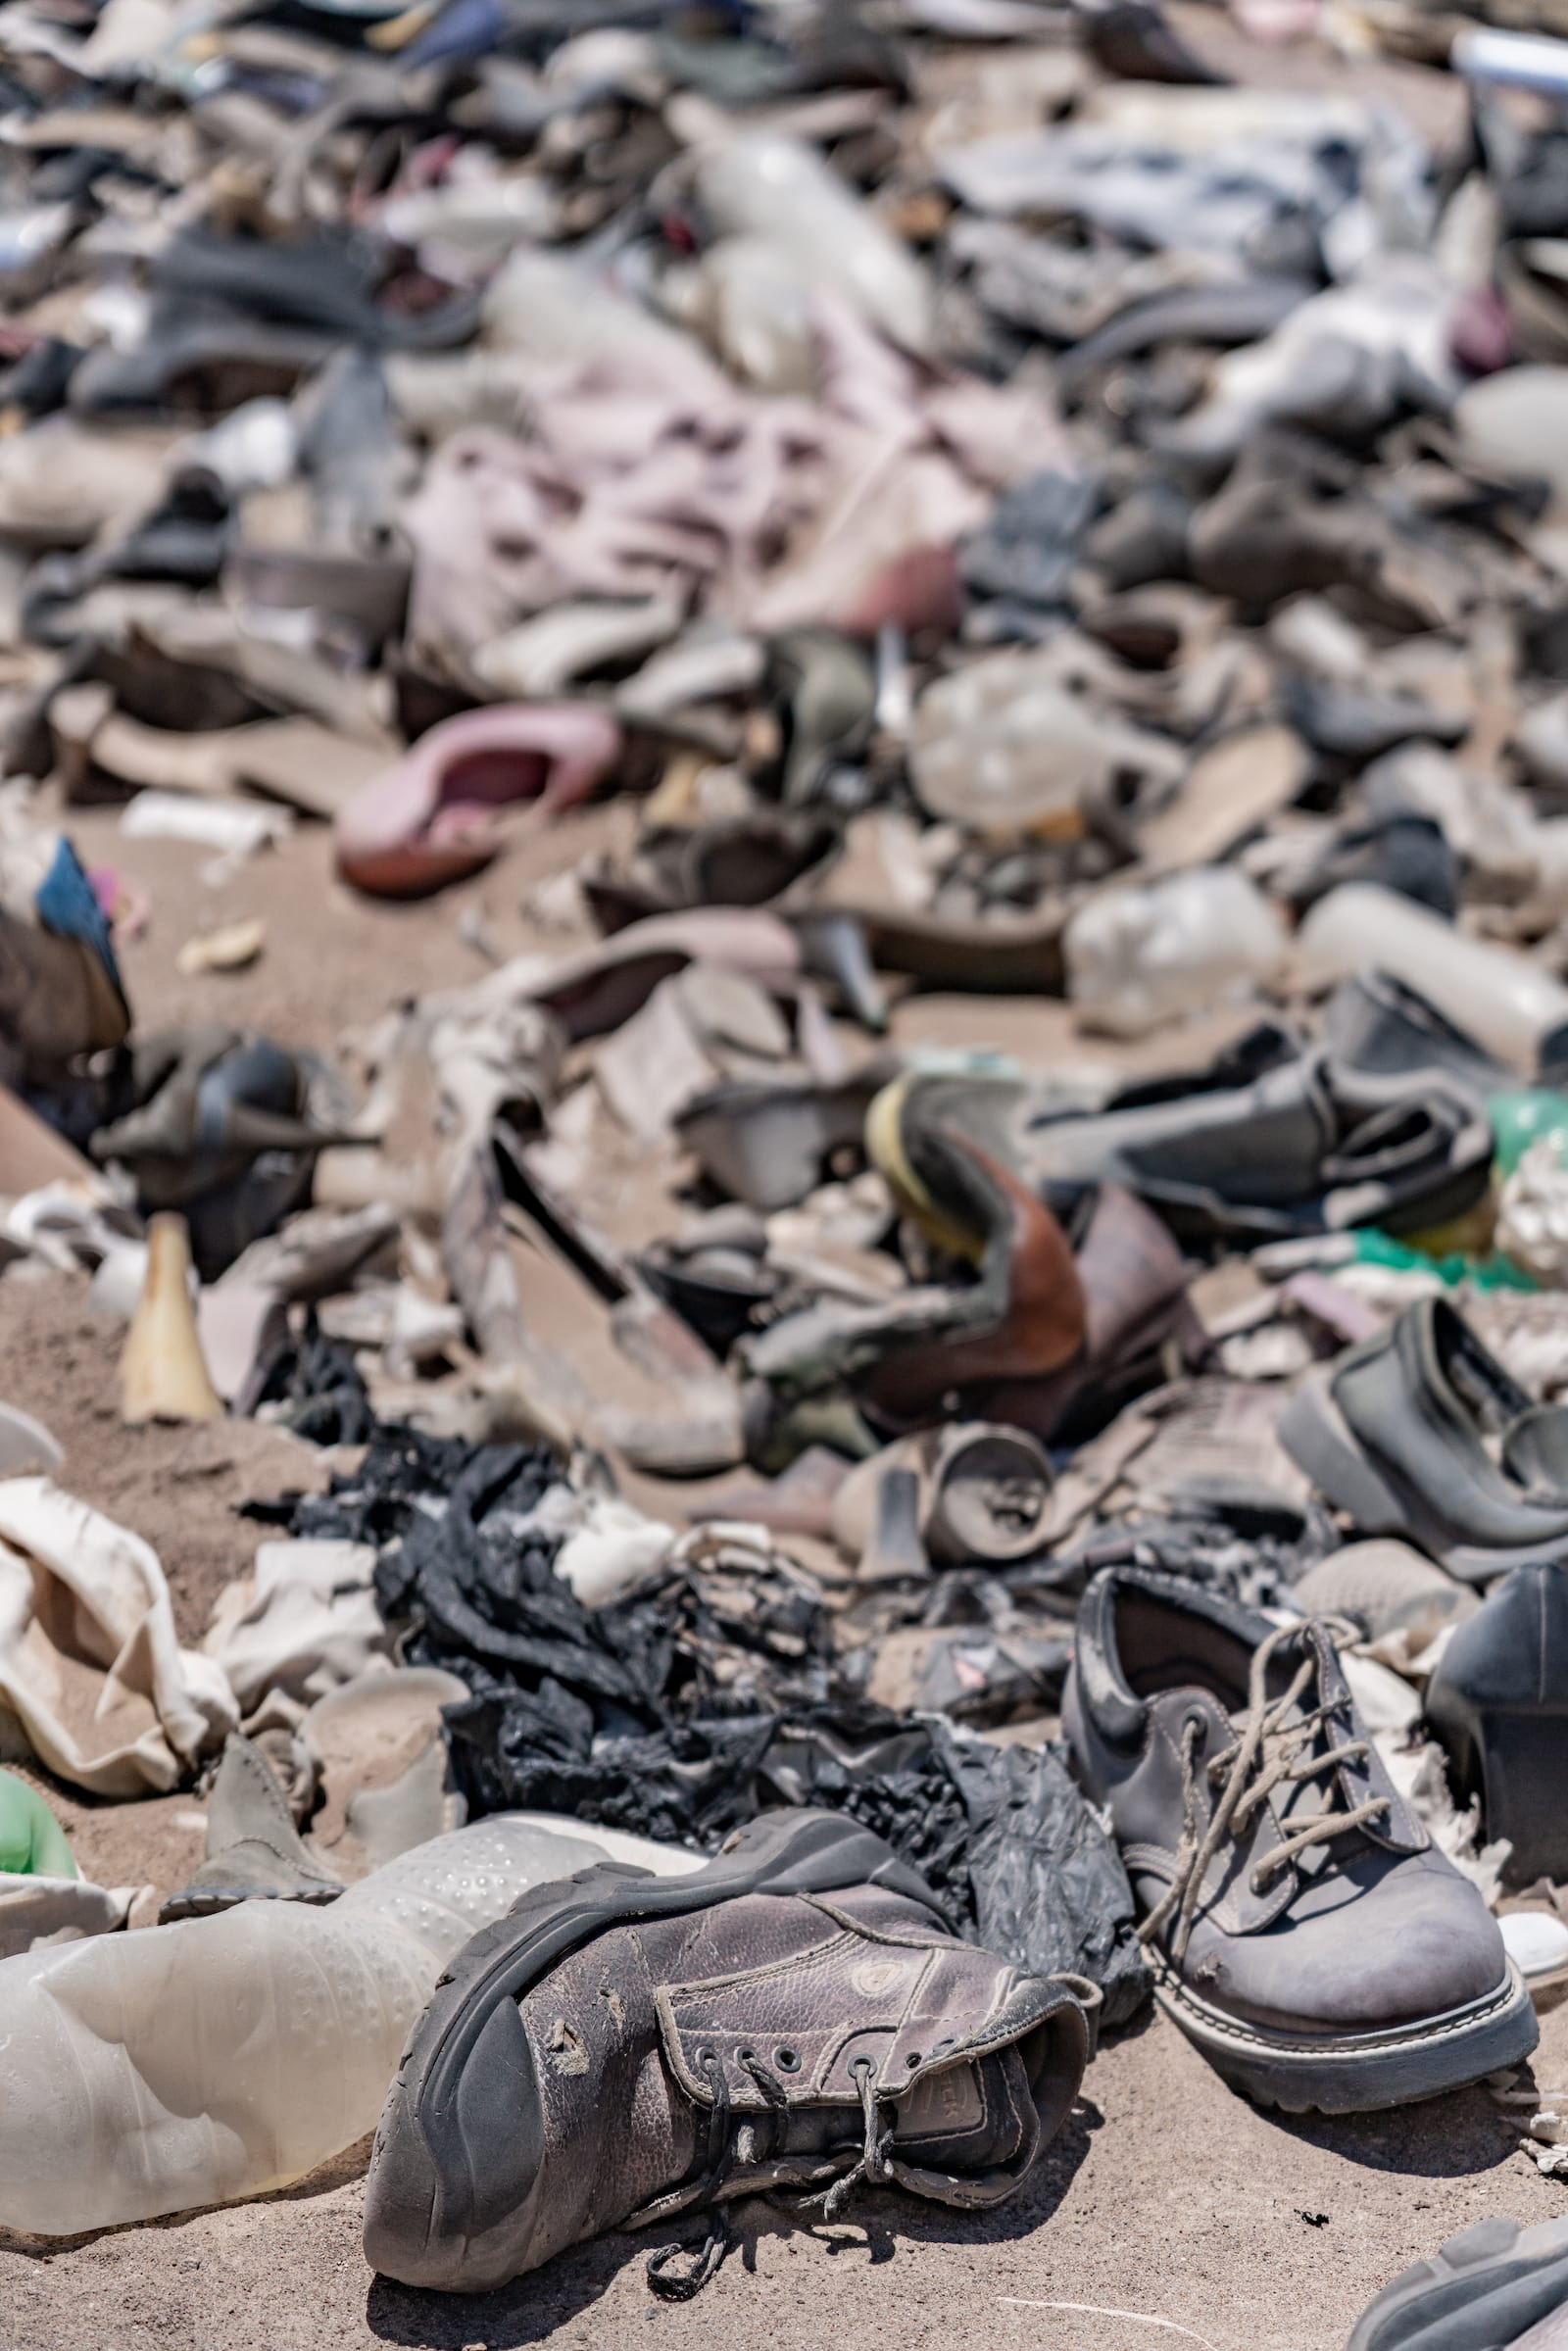 old shoes in a dense pile in the desert